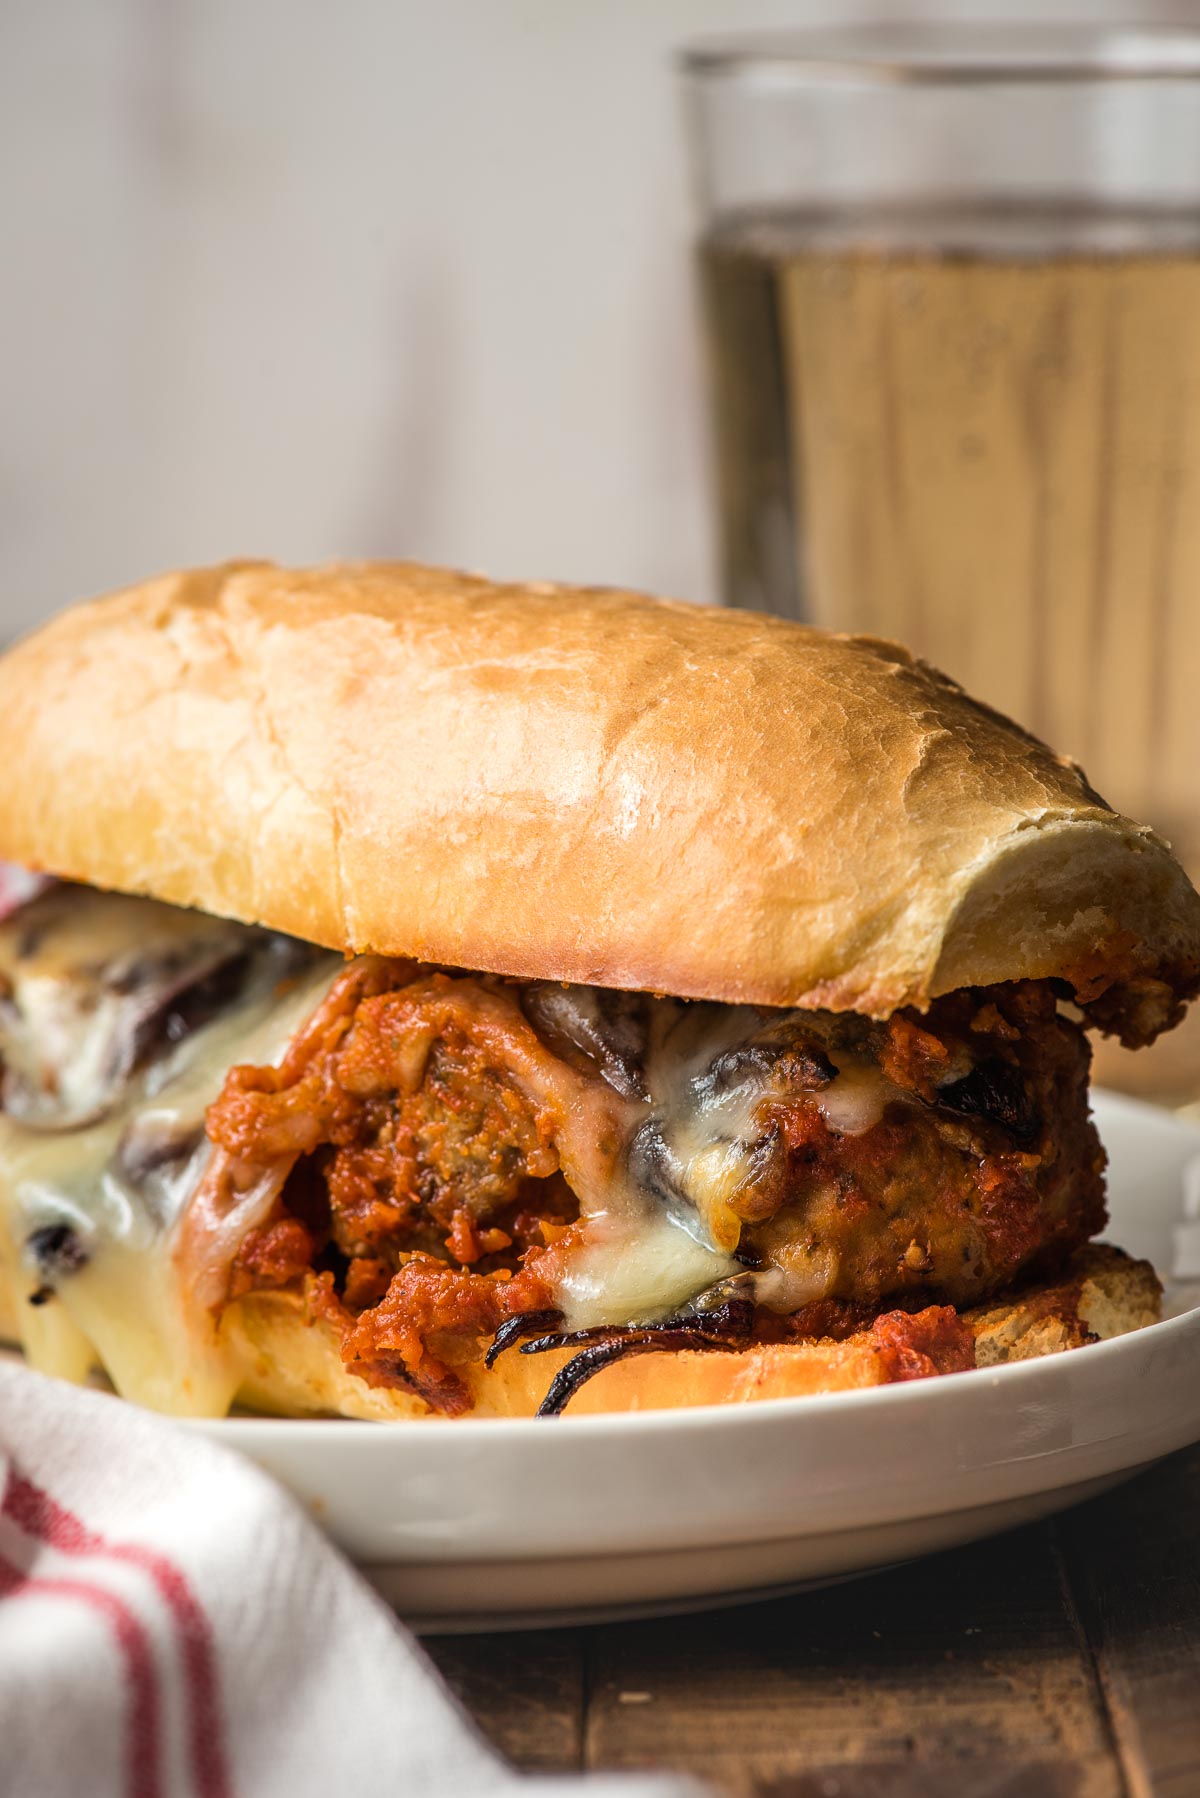 A melty meatball sub ready to eat.